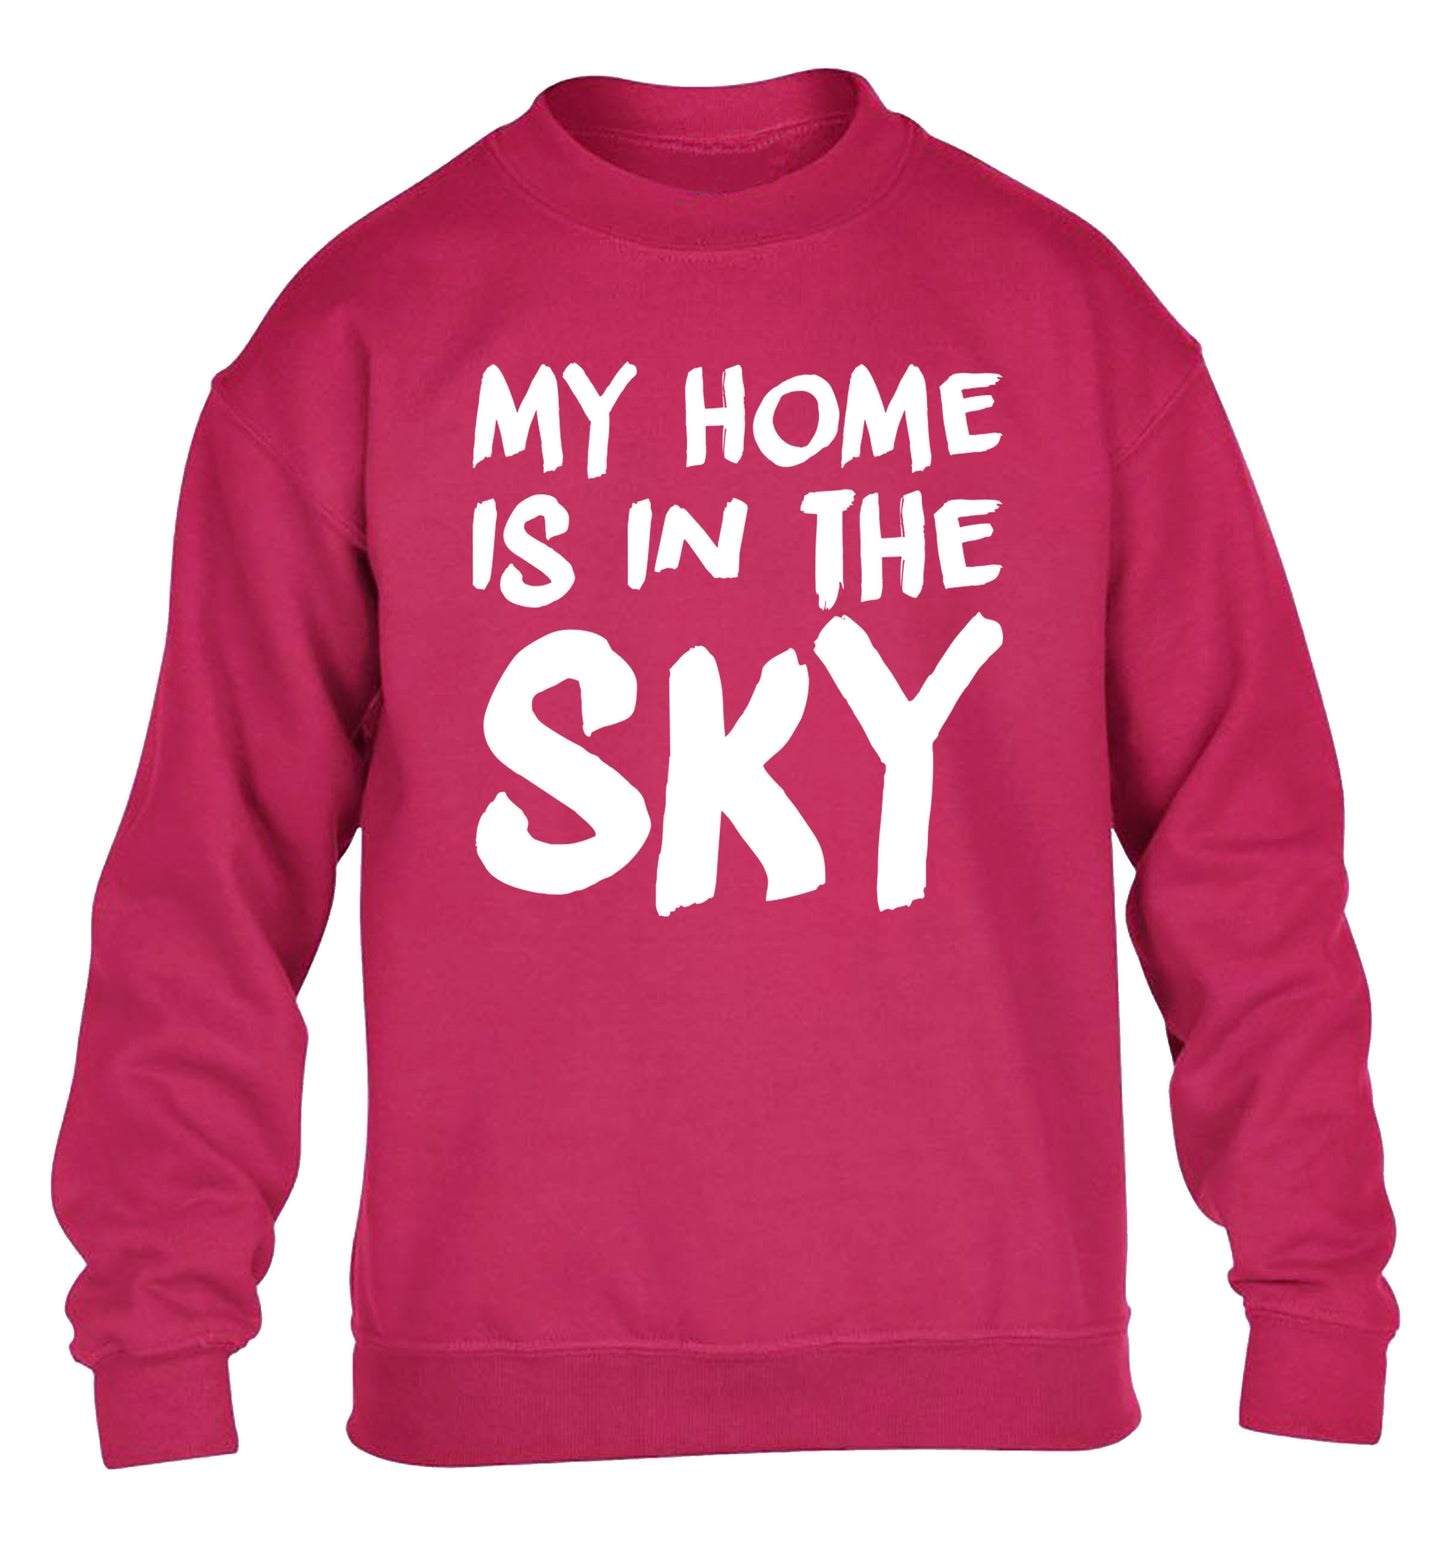 My home is in the sky children's pink sweater 12-14 Years